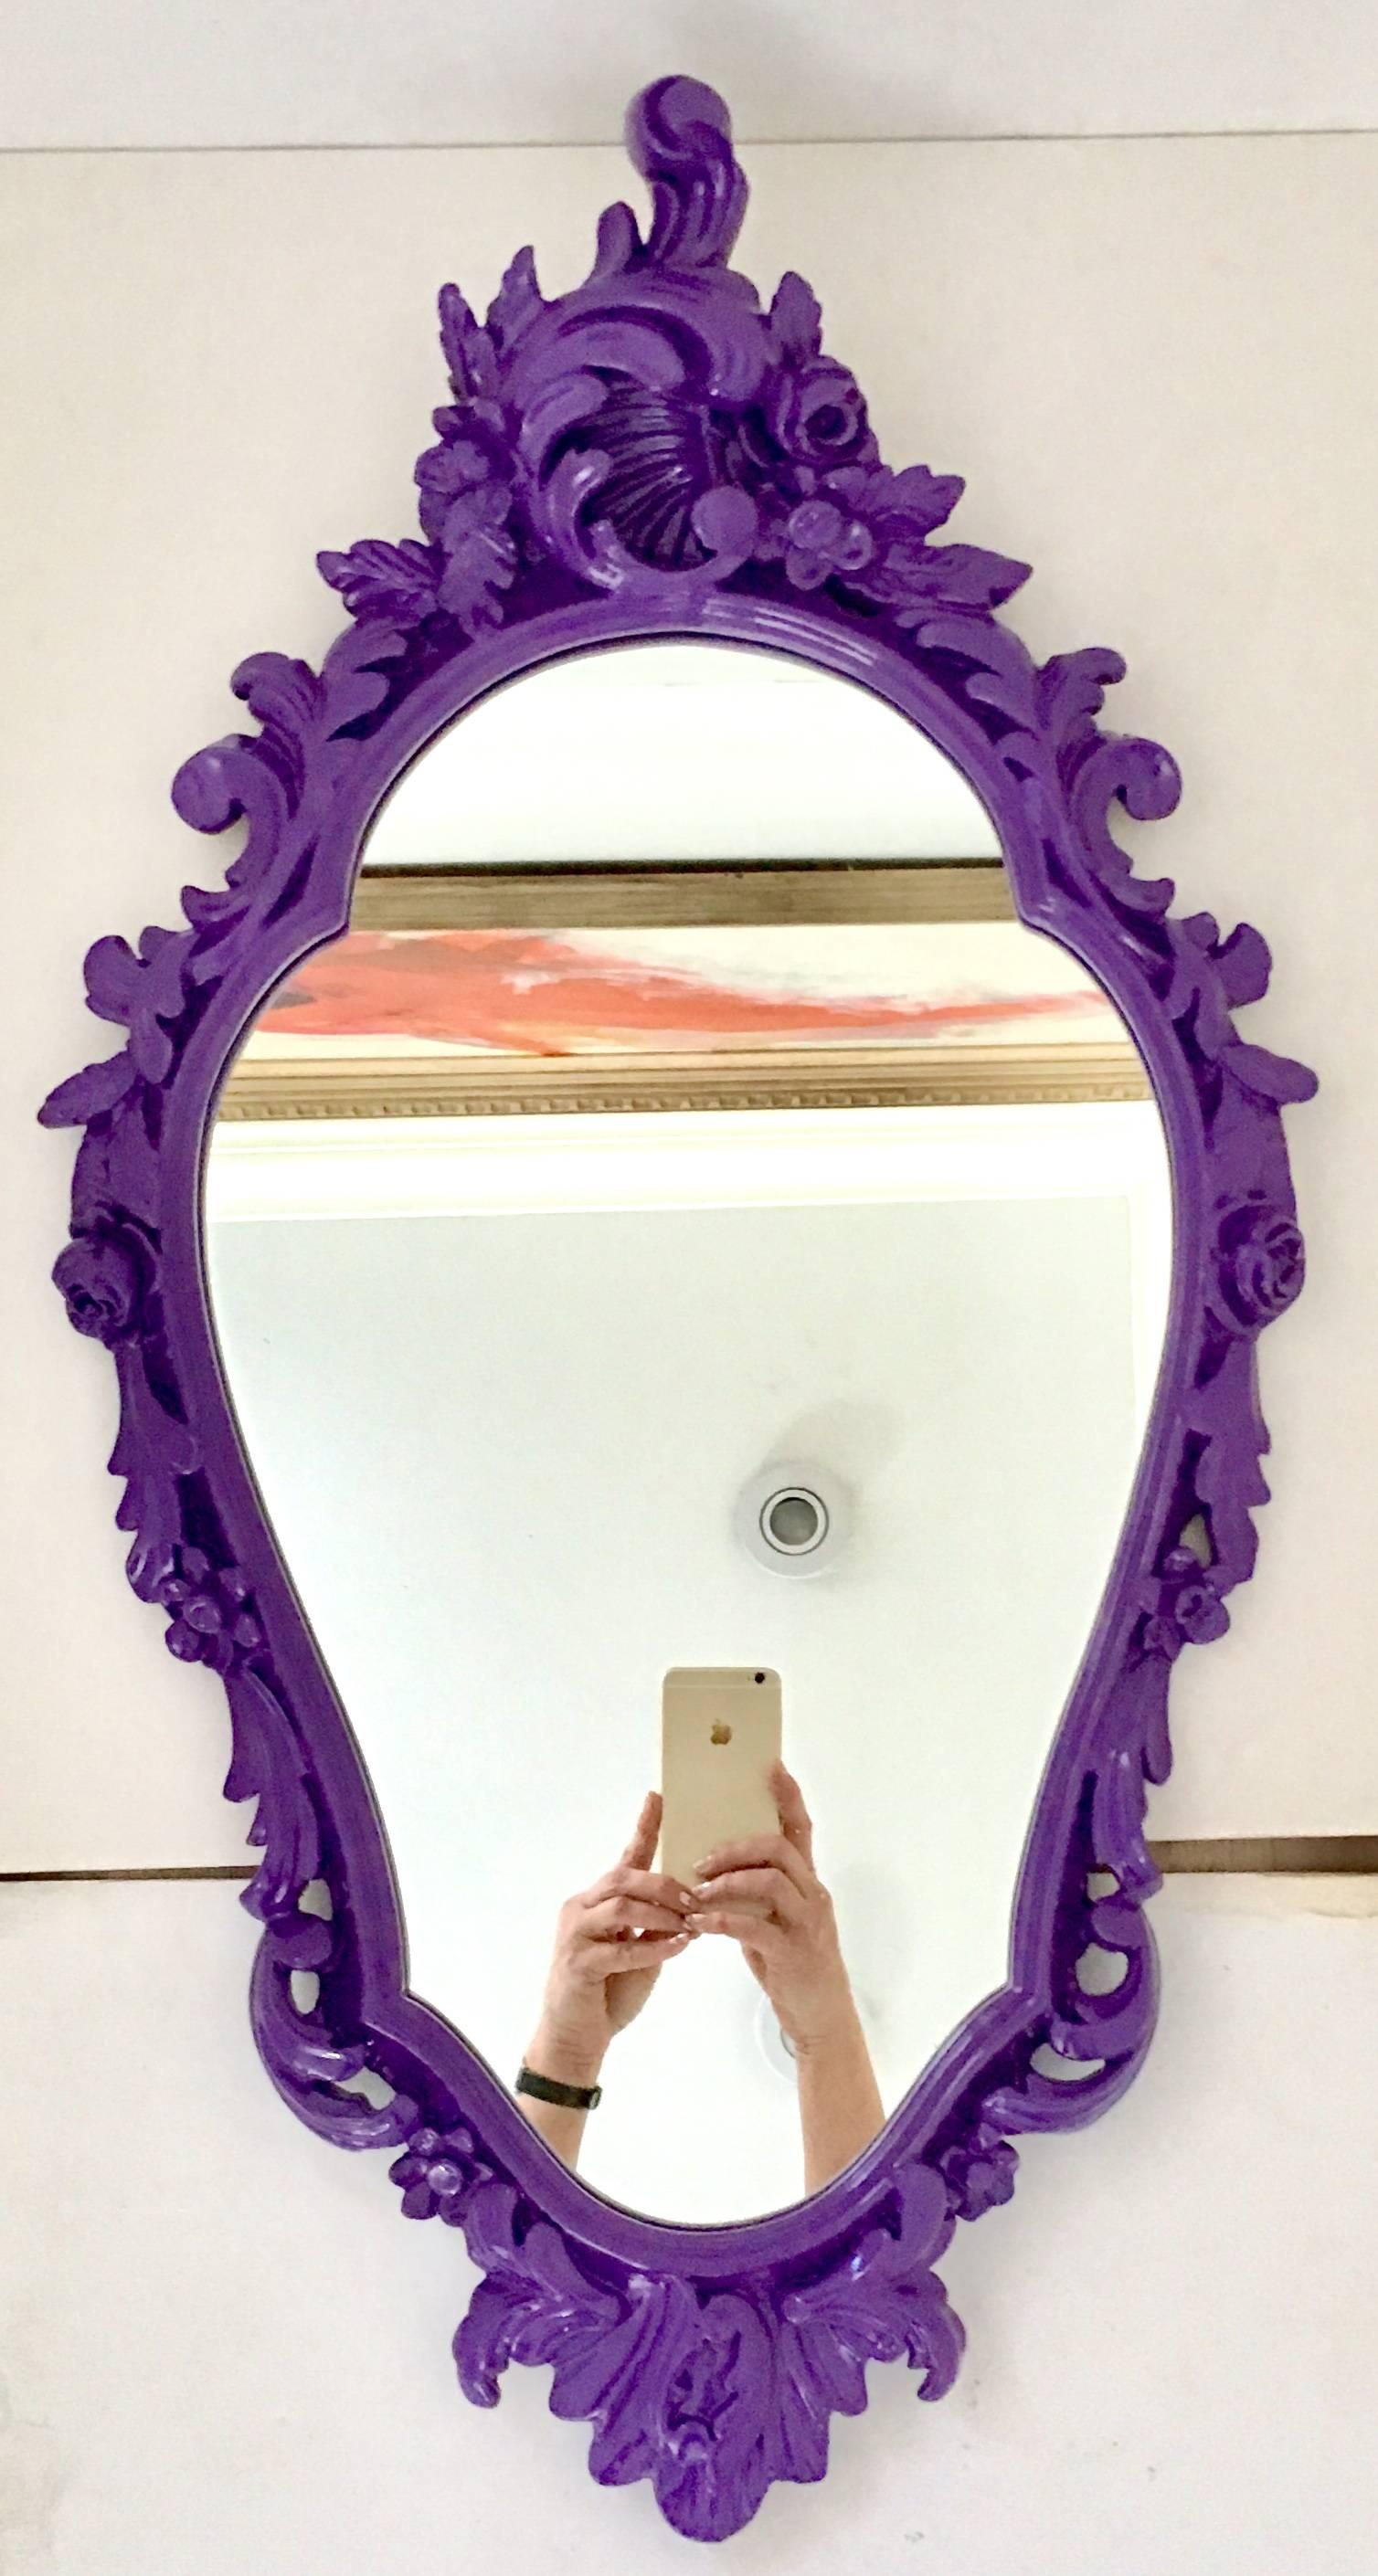 Pair of Vintage Newly Lacquered High Gloss Purple Rococo Style Wall Mirrors. Made of carved wood and ready to hang with existing hardware.
Projection from wall at top is 4.5